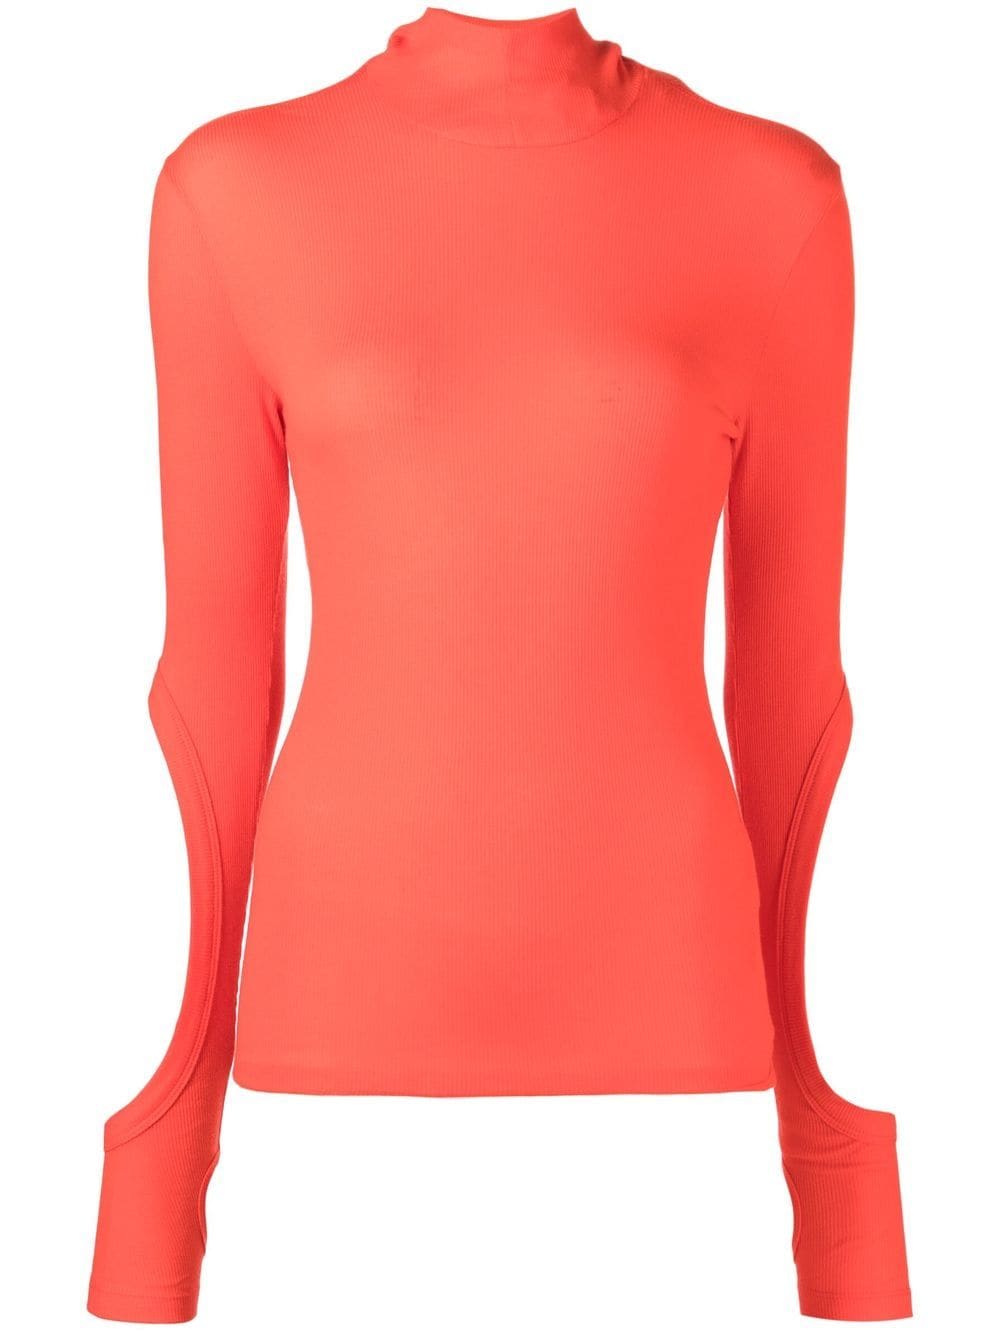 Dion Lee cut-out detail hooded top - Red